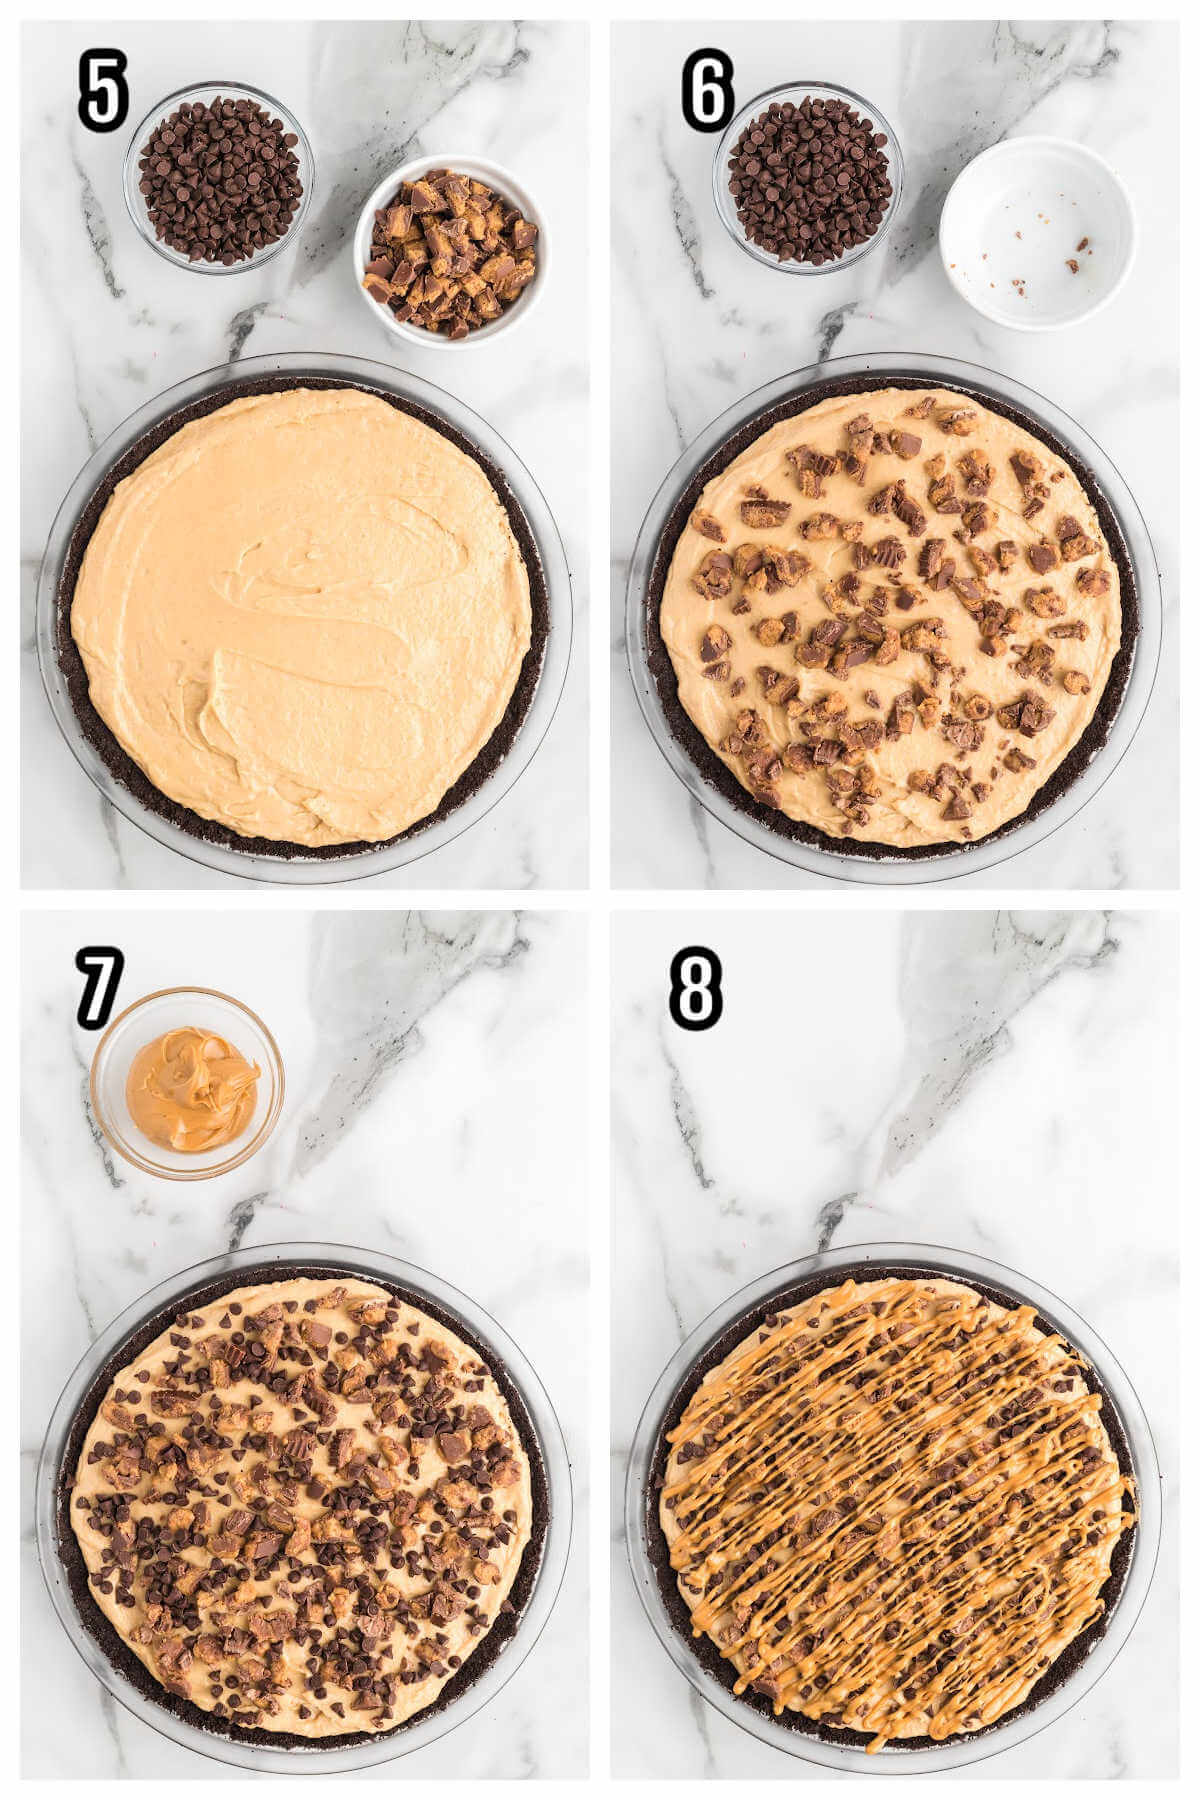 The second collage with the last four steps to making the pie with chocolate crust. 